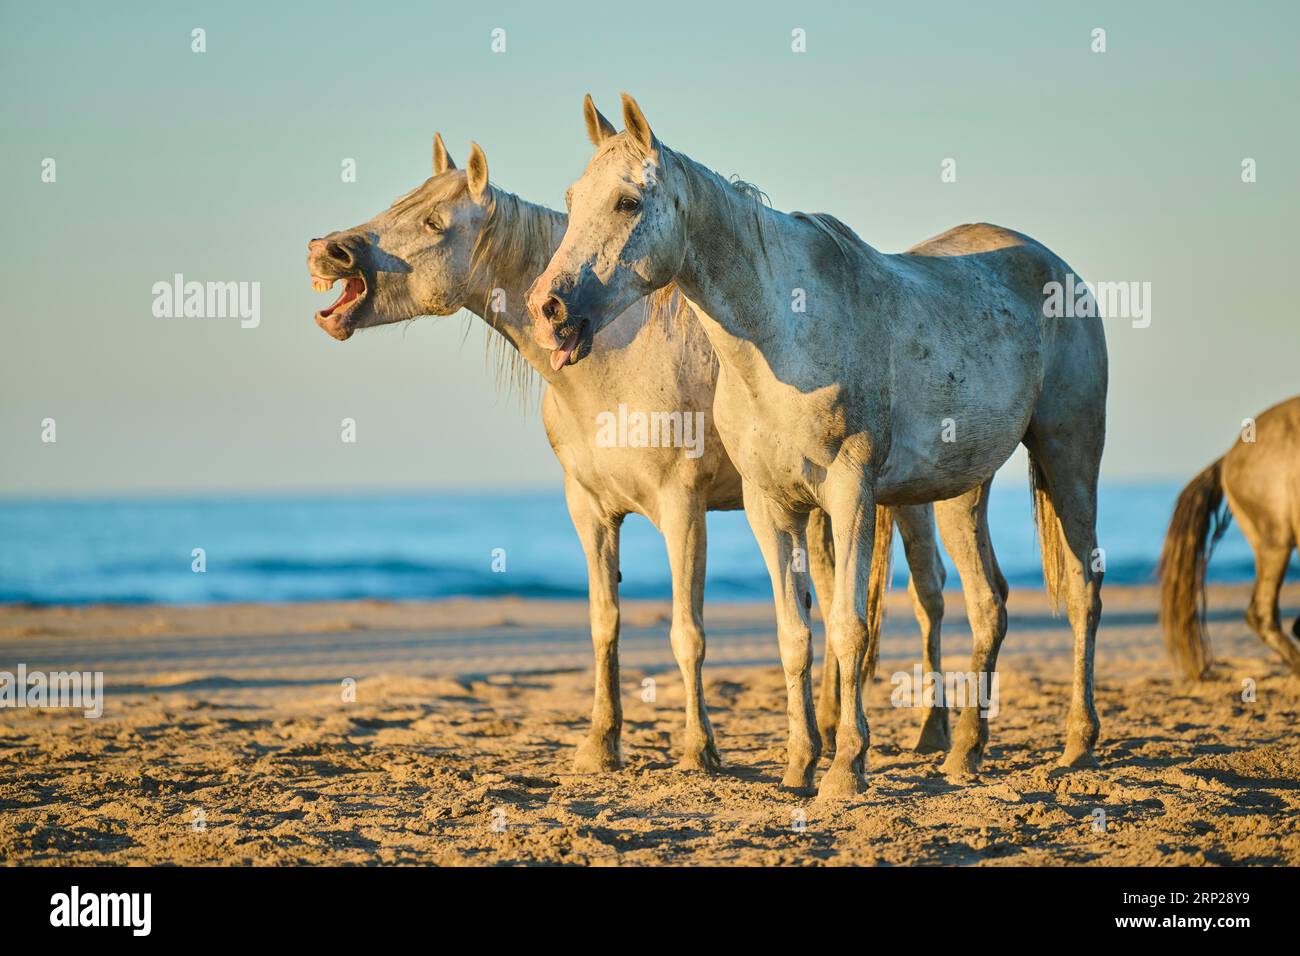 Camargue horses standing on a beach at sunrise, France Stock Photo